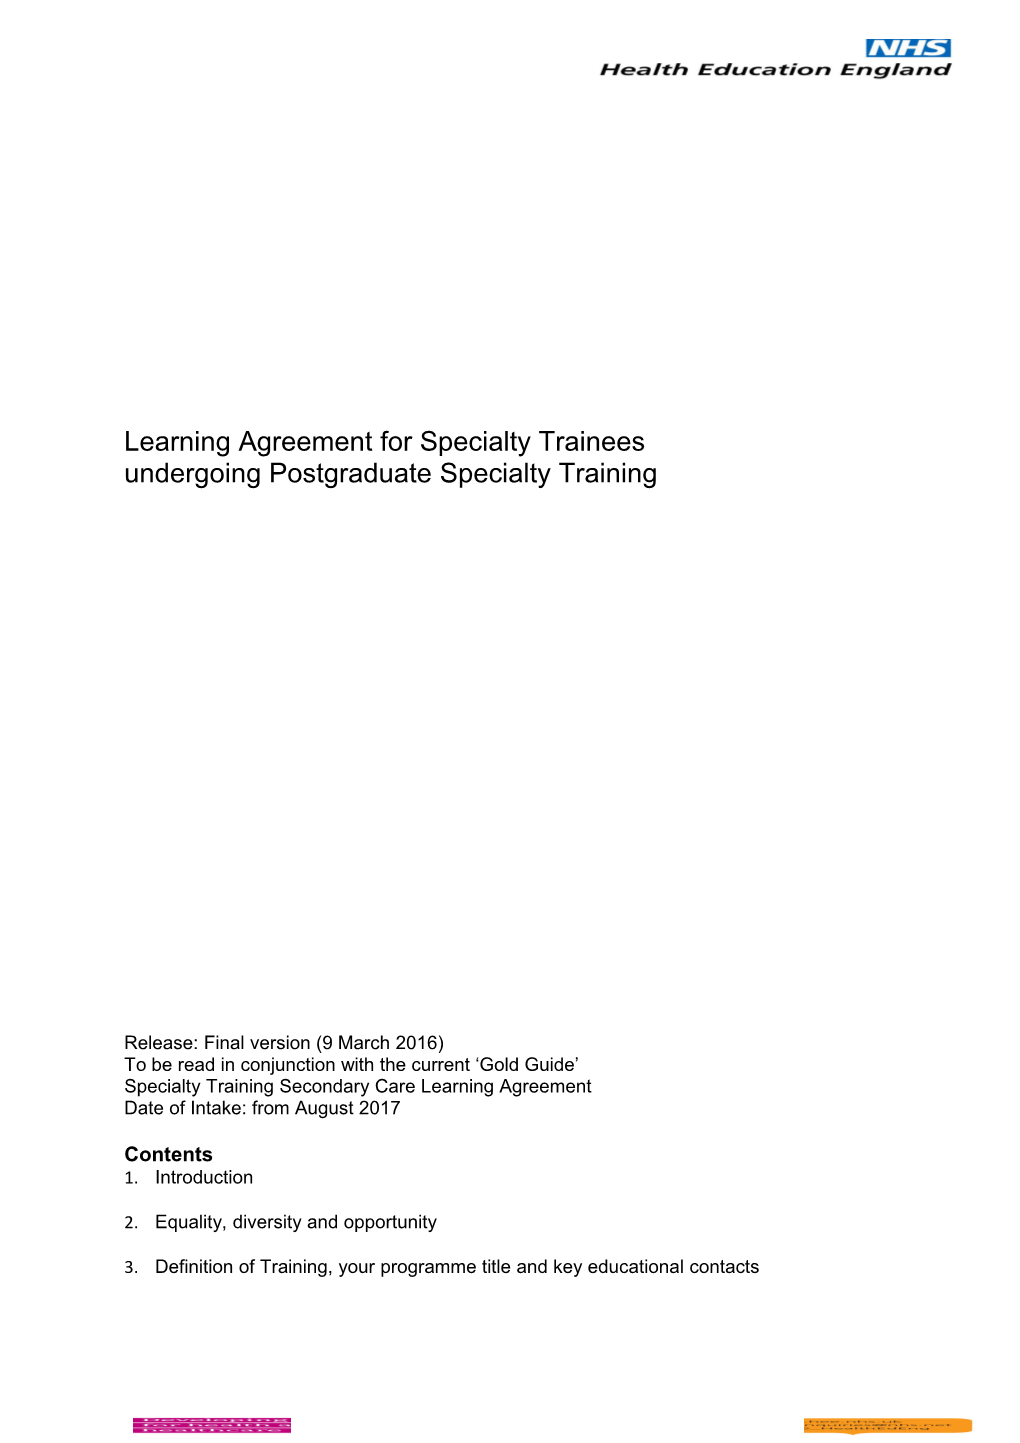 Learning Agreement for Specialty Trainees Undergoing Postgraduate Specialty Training